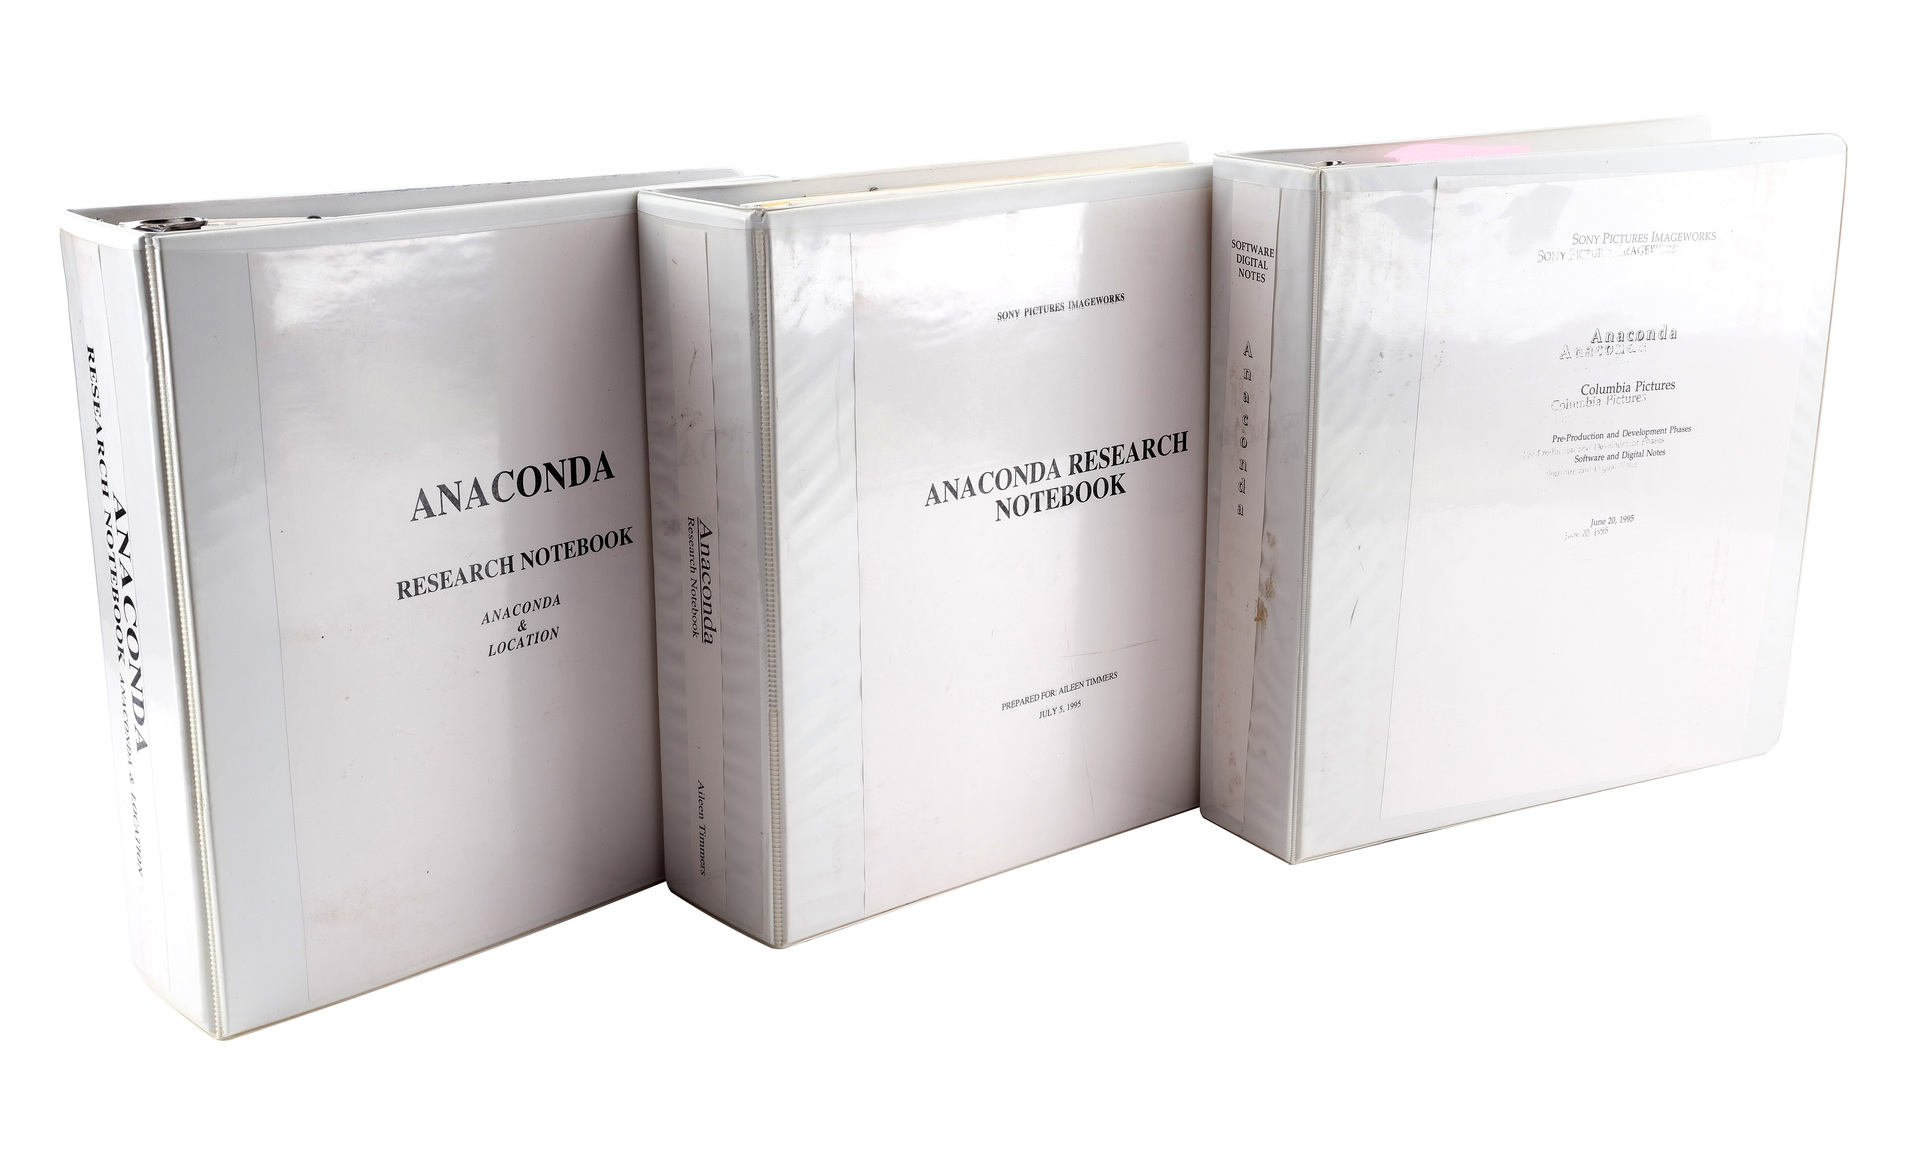 ANACONDA - Anaconda Display Heads with Screenplays, Production Binder, and Paperwork Collection - Image 8 of 24